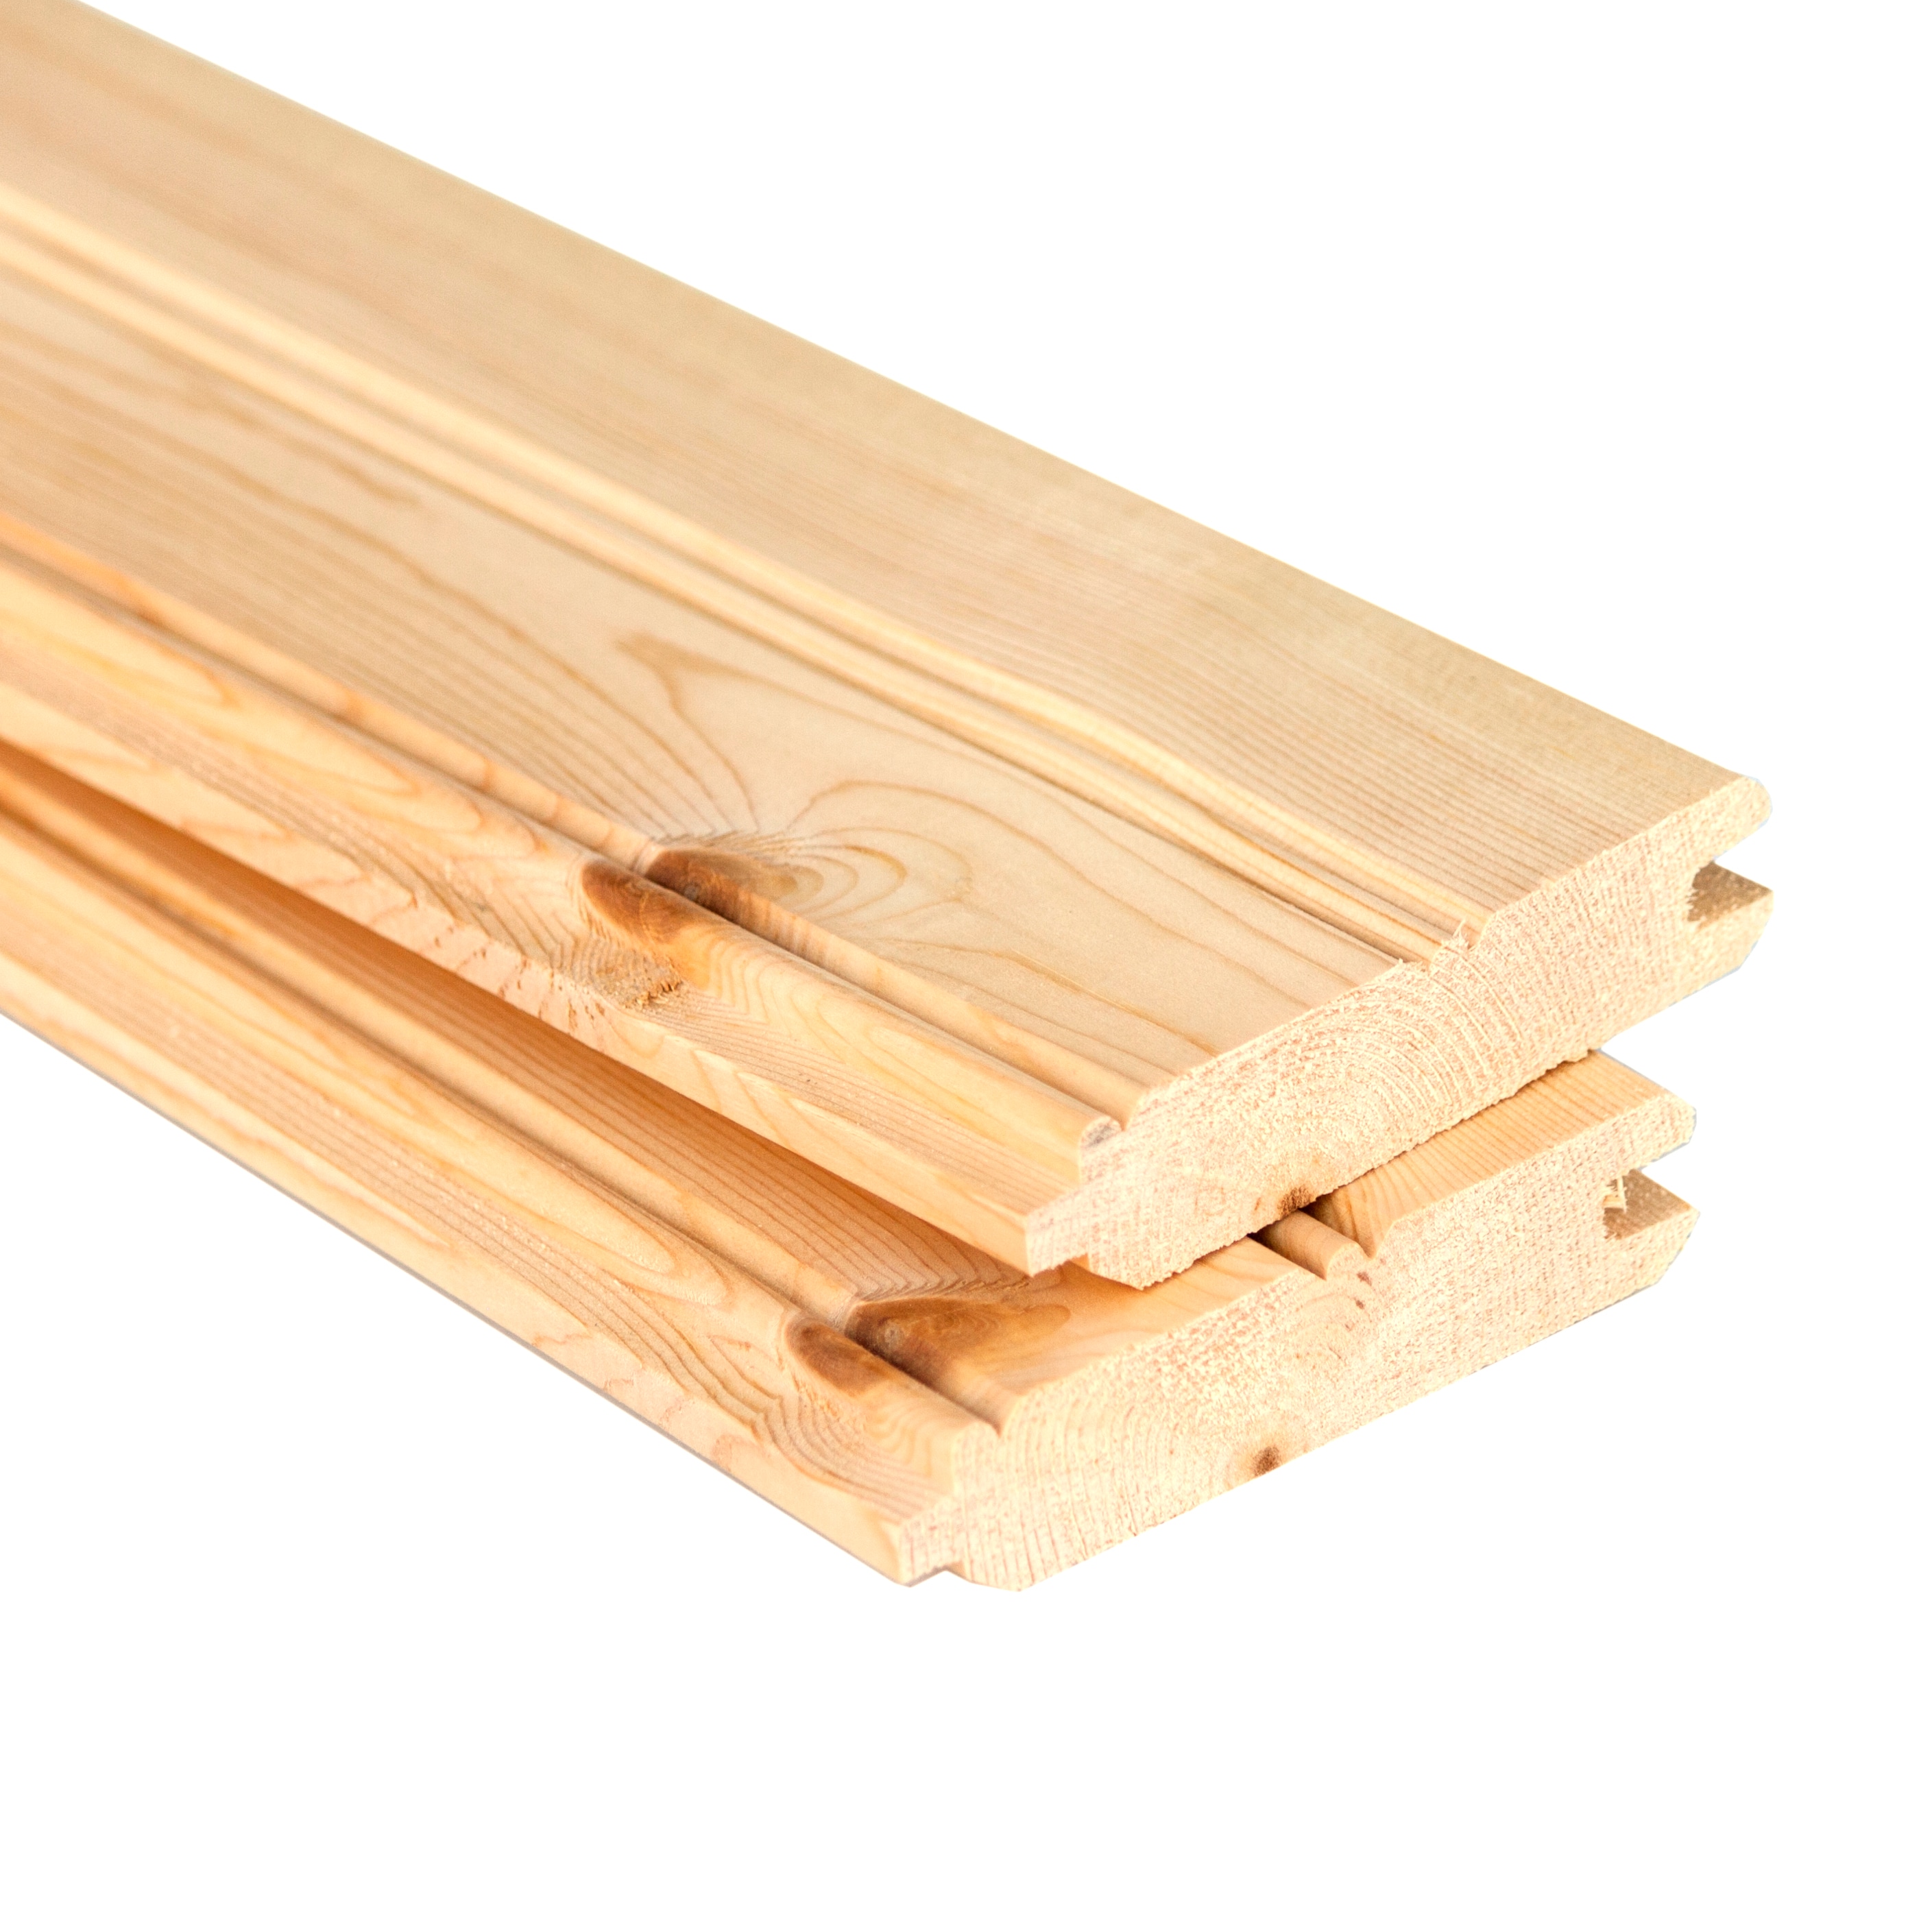 1 1/8-inch 4 x 8 Tongue and Groove Plywood Yellow Pine - Ritter Lumber